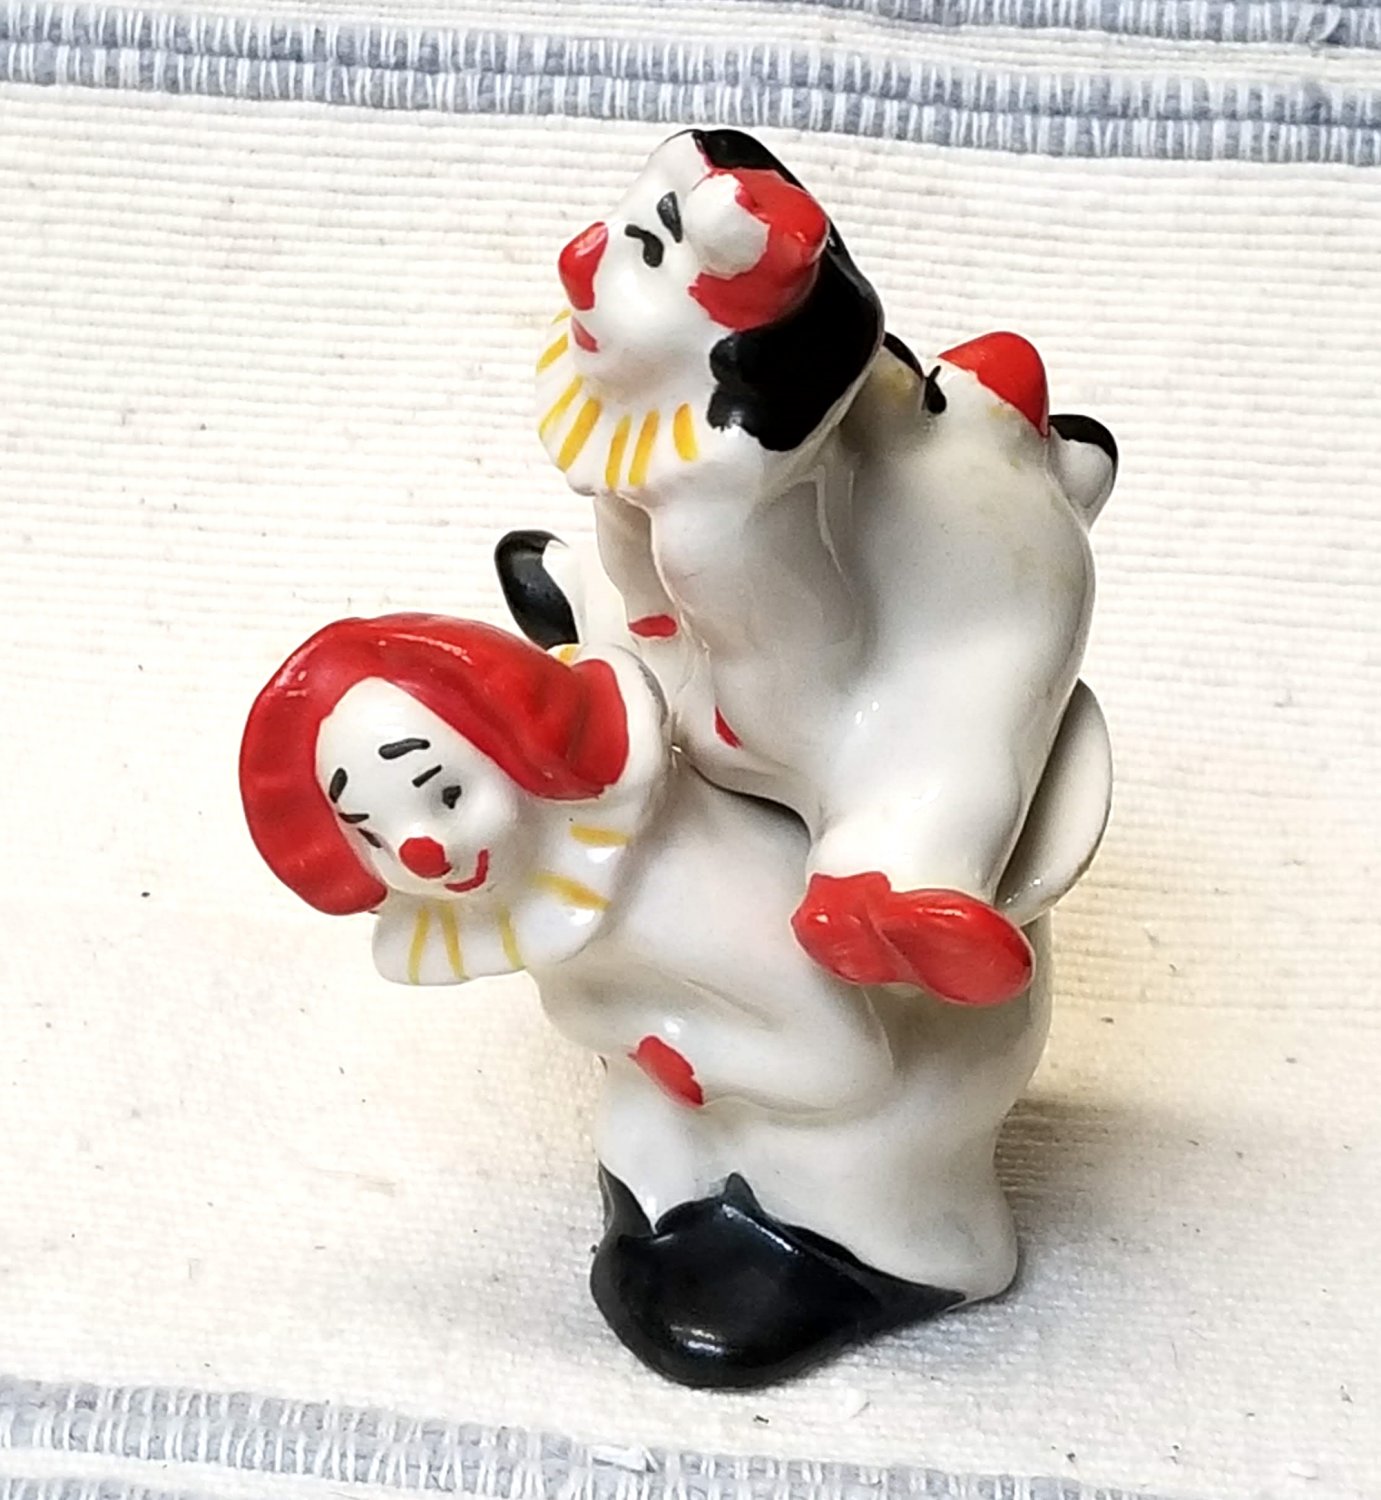 Clowns Playing Leap Frog Go-with Salt & Pepper Shakers